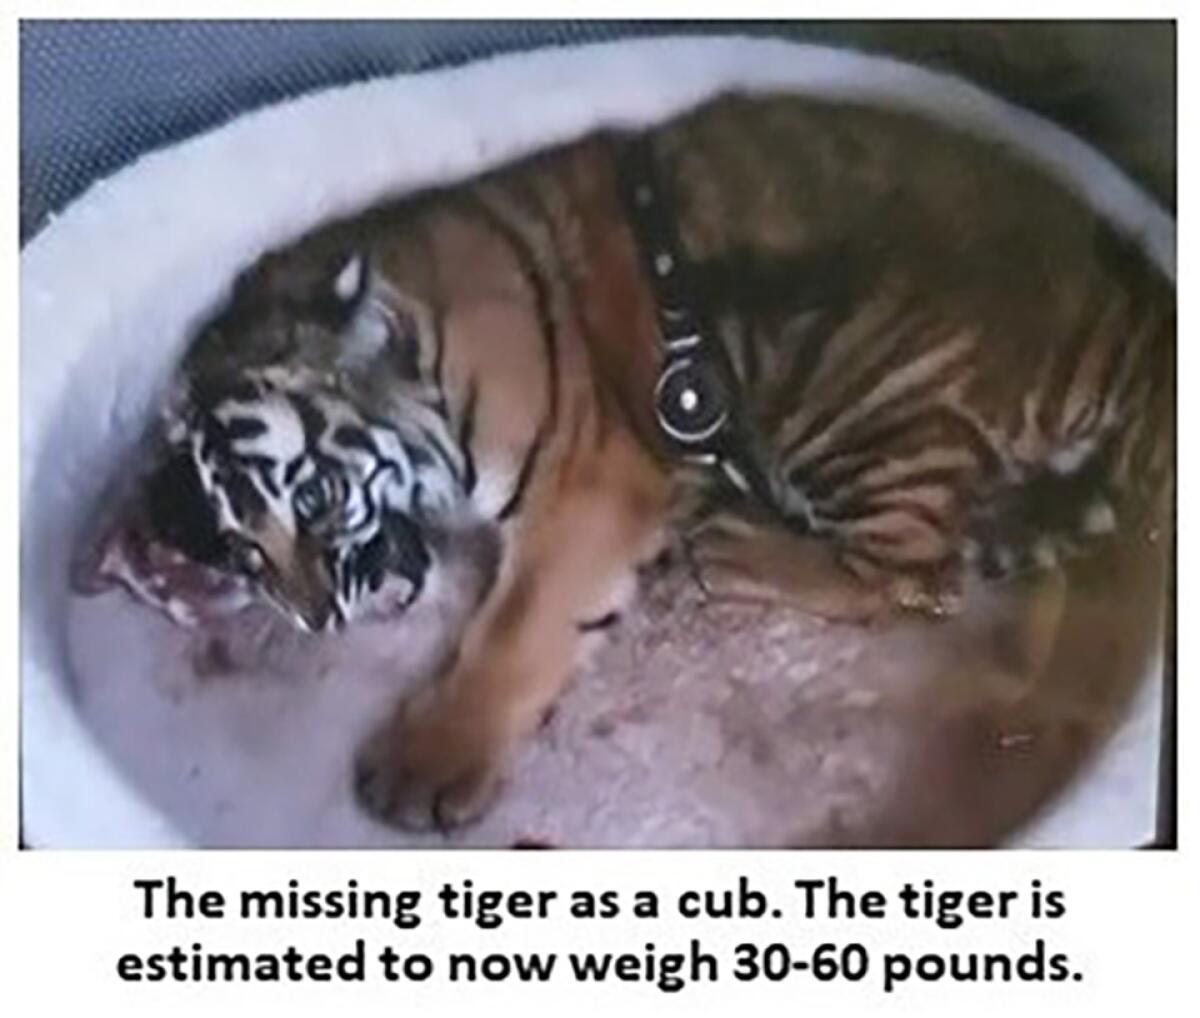 This undated image released by New Mexico Department of Game and Fish shows a missing tiger in Alburquerque, N.M. The animal is believed to be less than 1 year old and 60 pounds, but tigers can grow to 600 pounds. Officials say the alligator was taken to a wildlife facility after a Aug. 12 search, and a 26-year-old man was arrested. Authorities in New Mexico found an alligator and large quantities of drugs, guns and money at two homes in Albuquerque last month, but on Saturday, Sept. 10, 2022, they said they are still searching for a young tiger they think is being being illegally kept as a pet. (New Mexico Department of Game and Fish via AP)